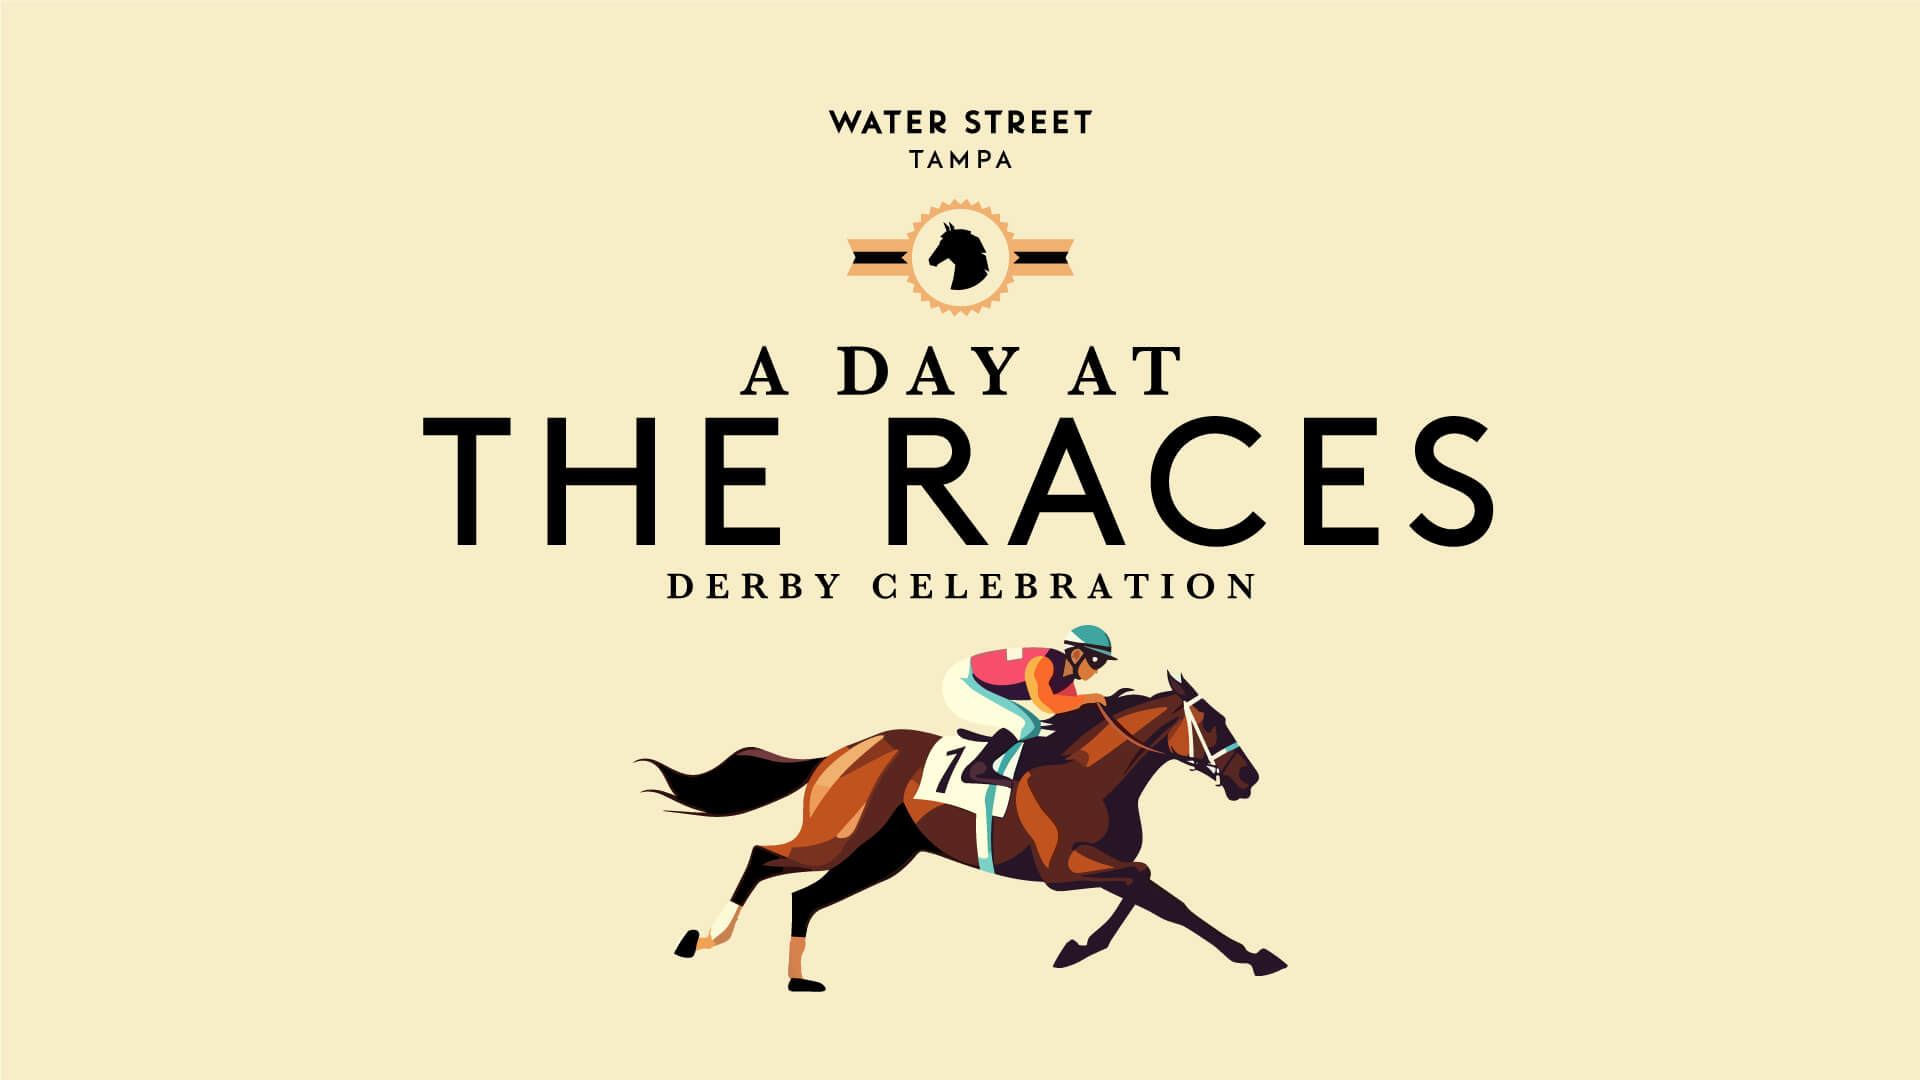 A graphic of A Day of the Races with a horse and rider illustration